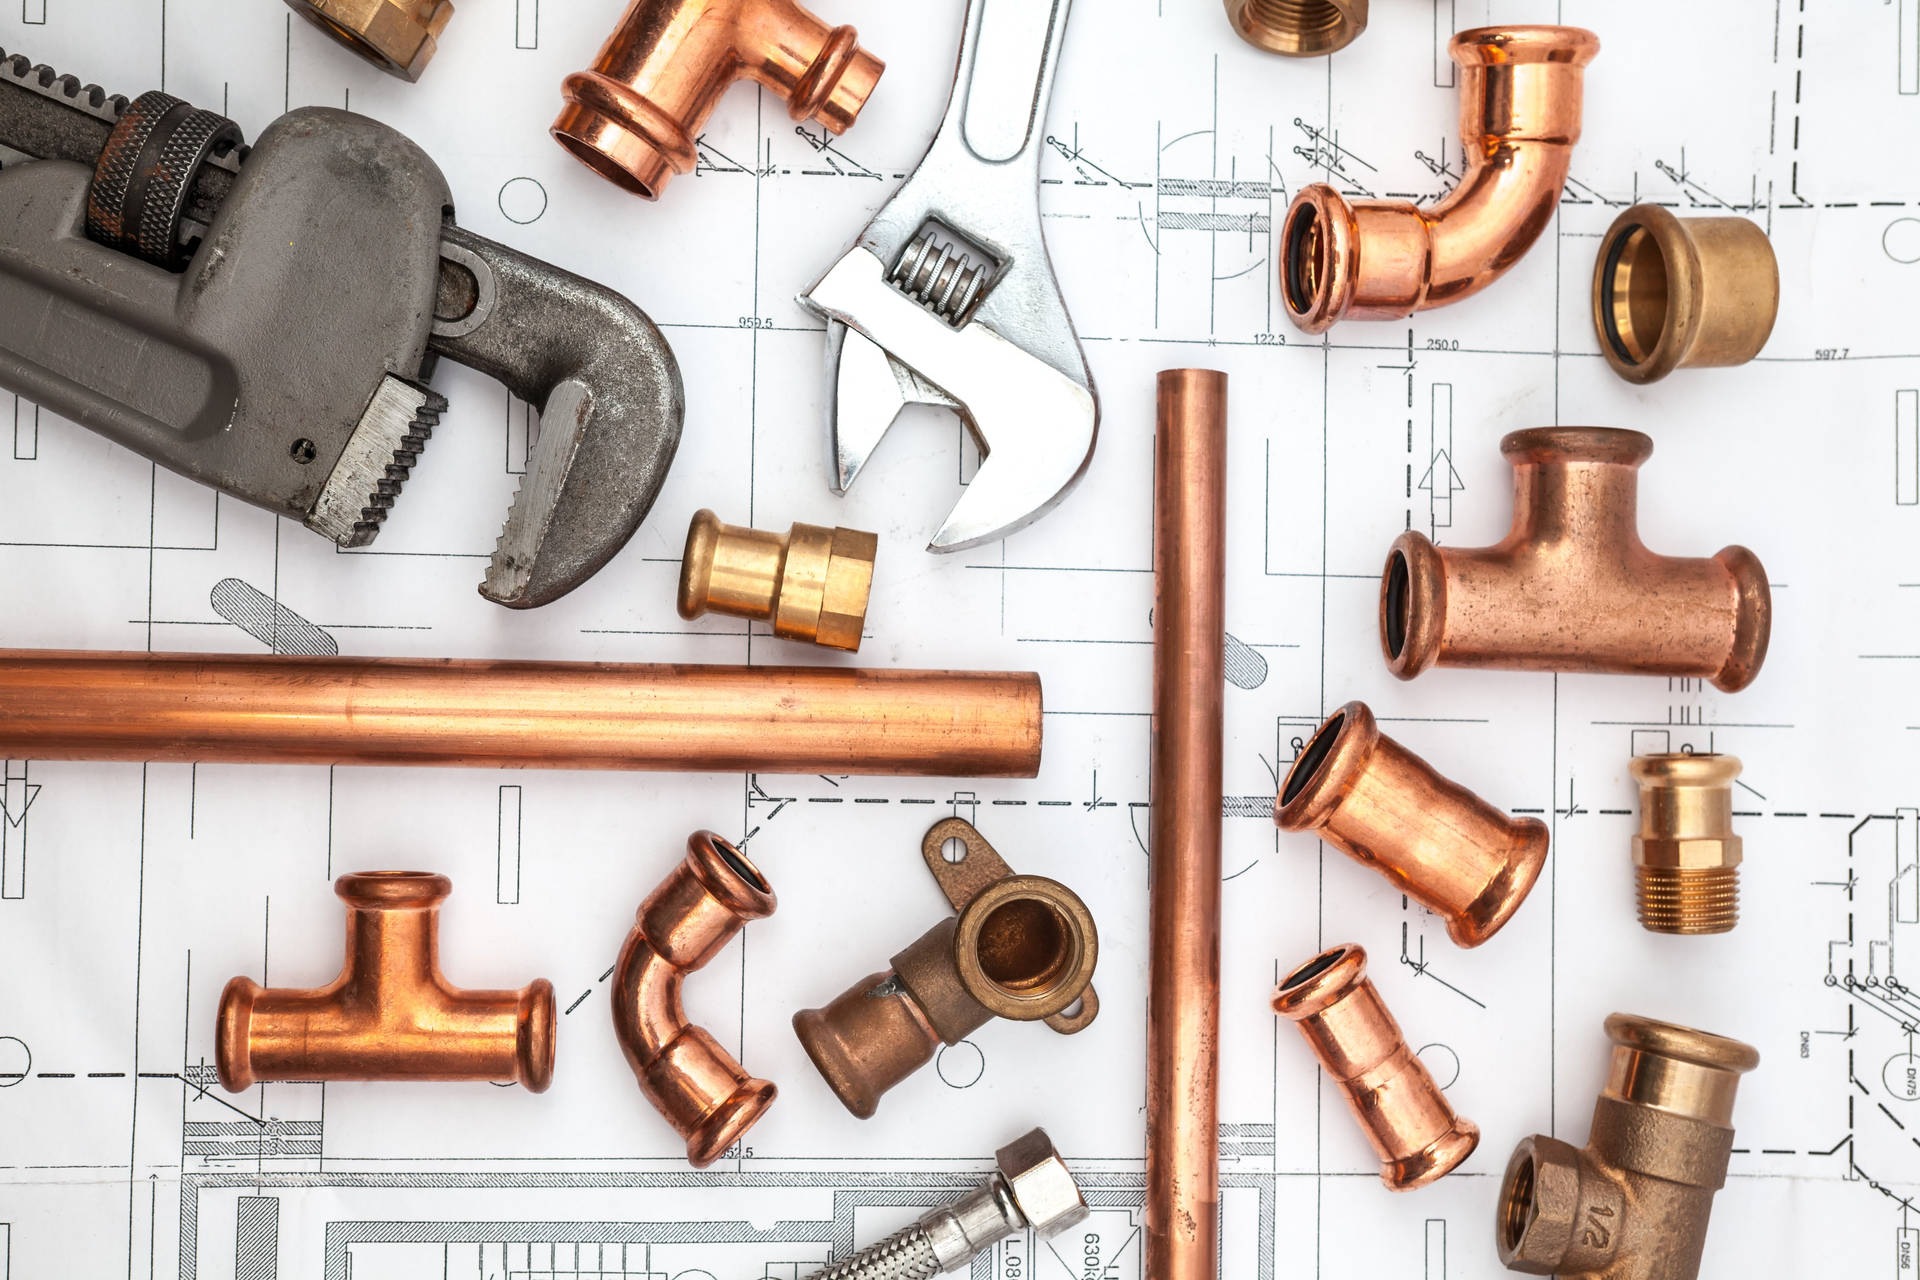 Commercial Plumber Tools And Water Pipes Wallpaper